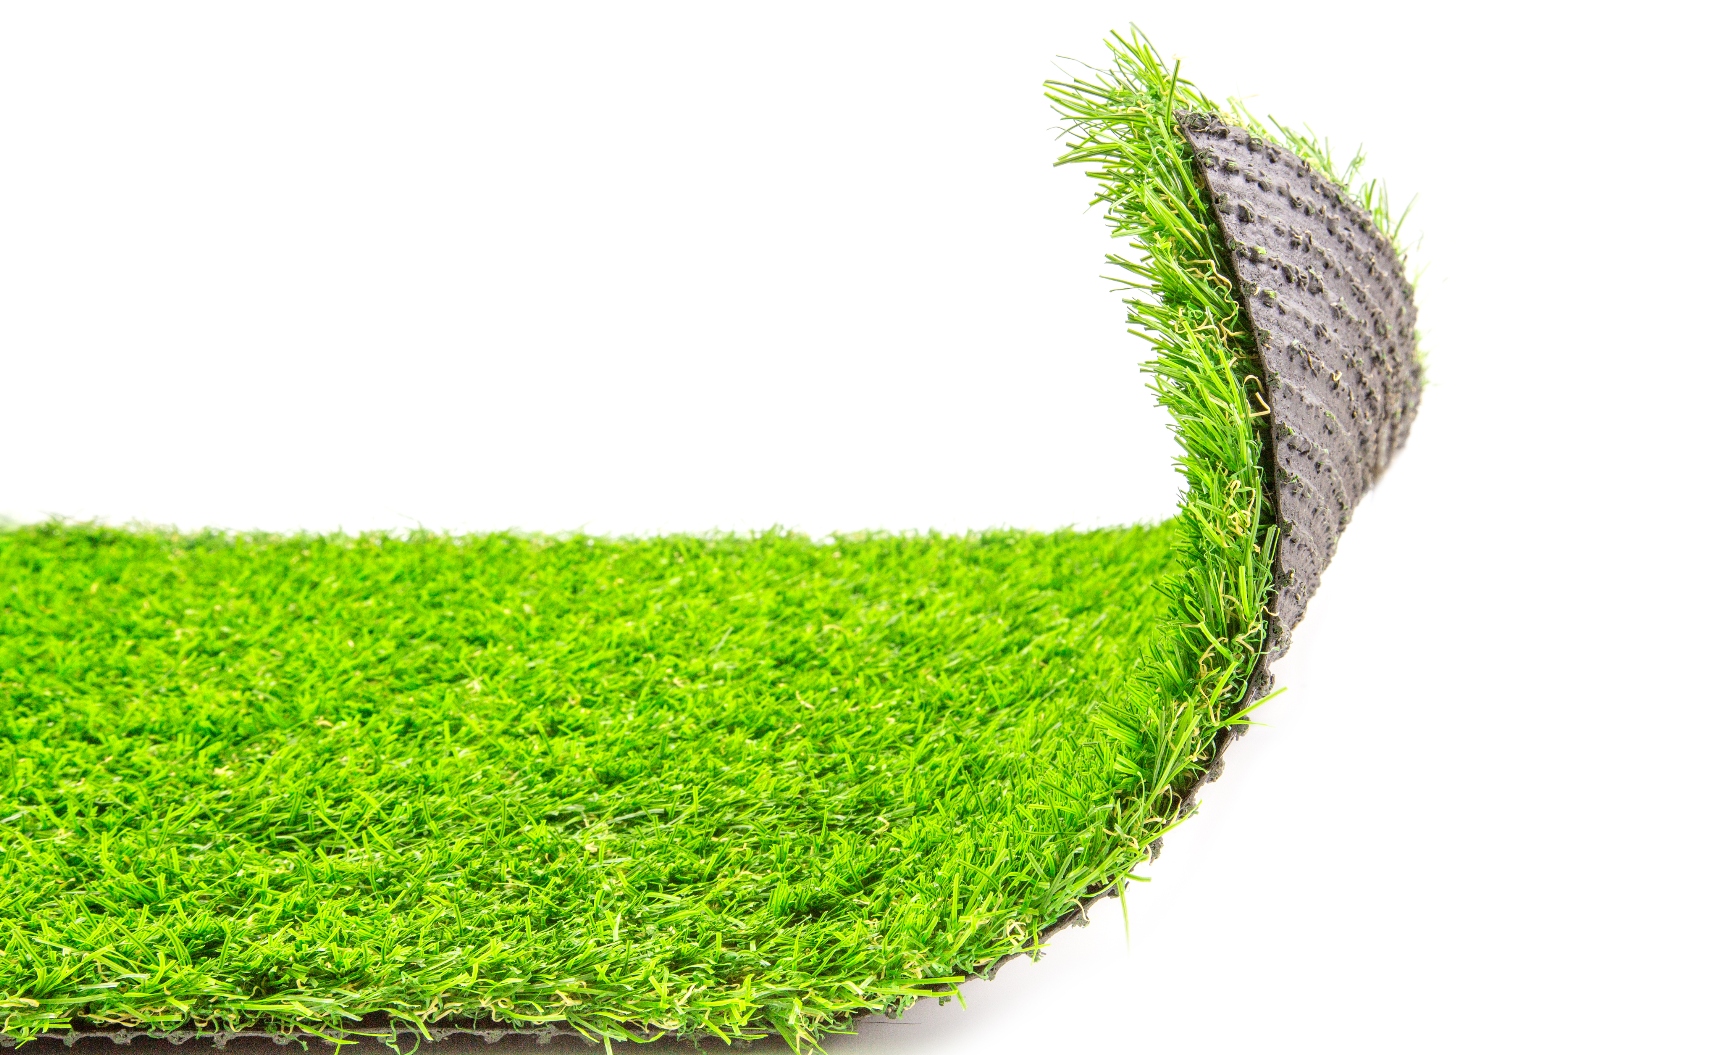 How to install synthetic turf: Government releases “disappointing” draft guidelines